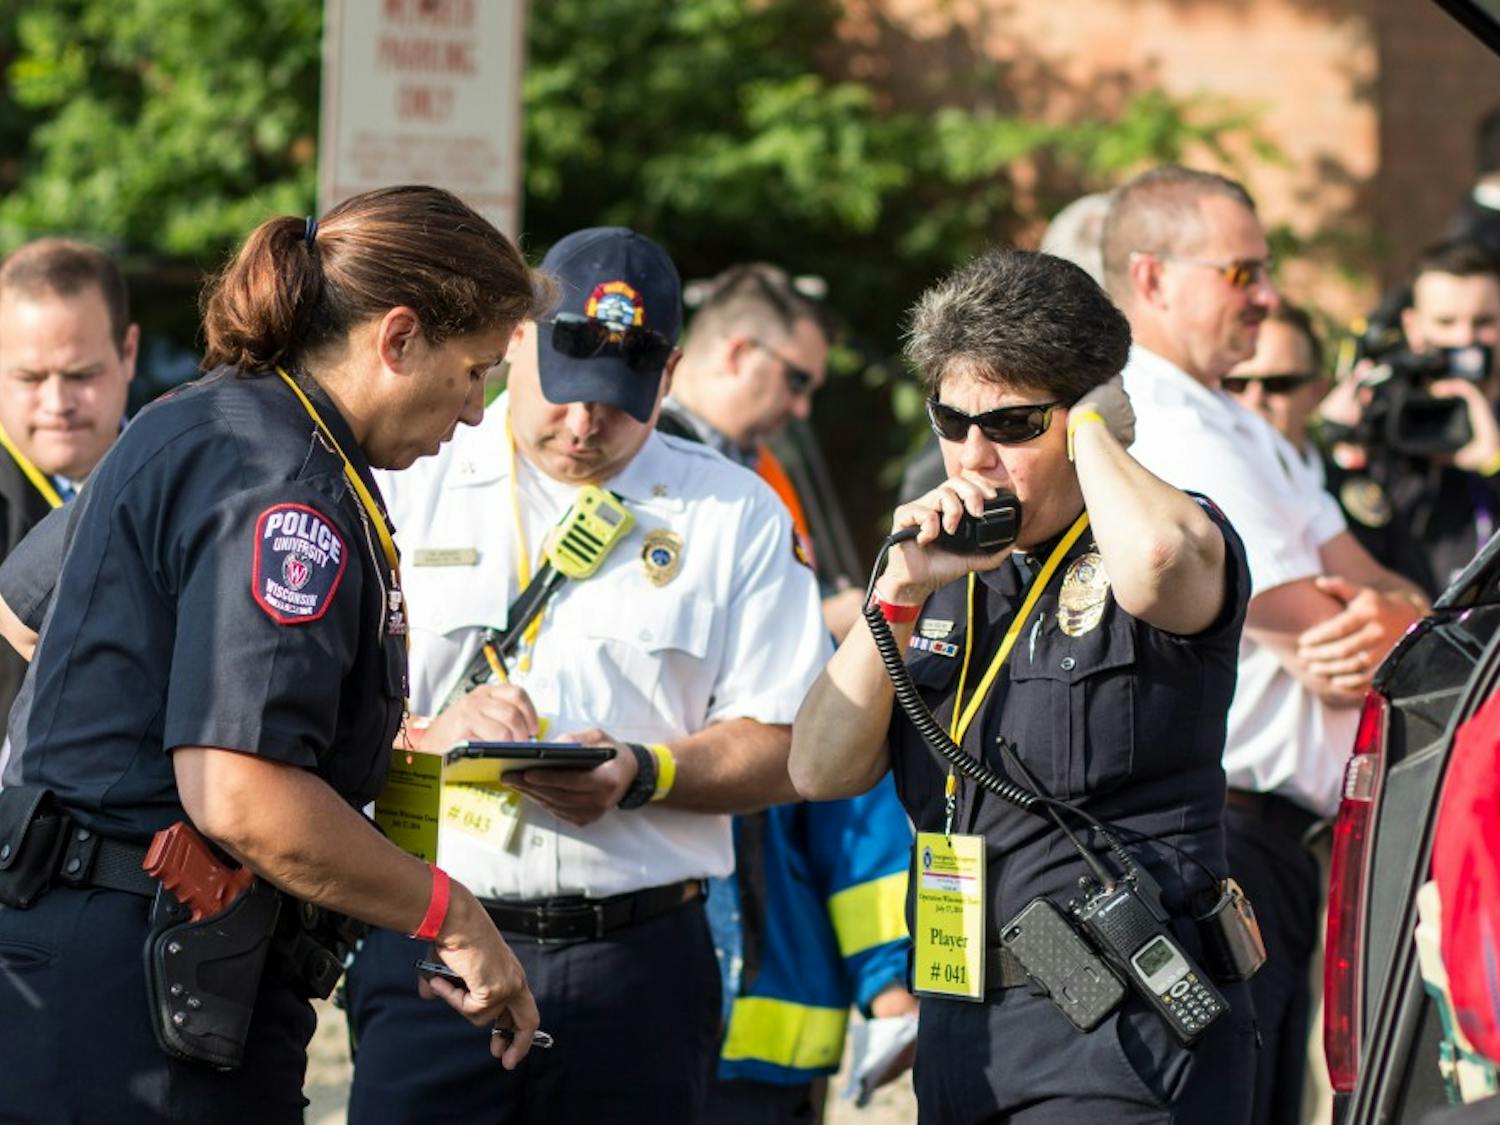 Less than a week after the deadly shooting, UW-Madison students, faculty and law enforcement are evaluating their own preparedness should a similar event strike their own campus.